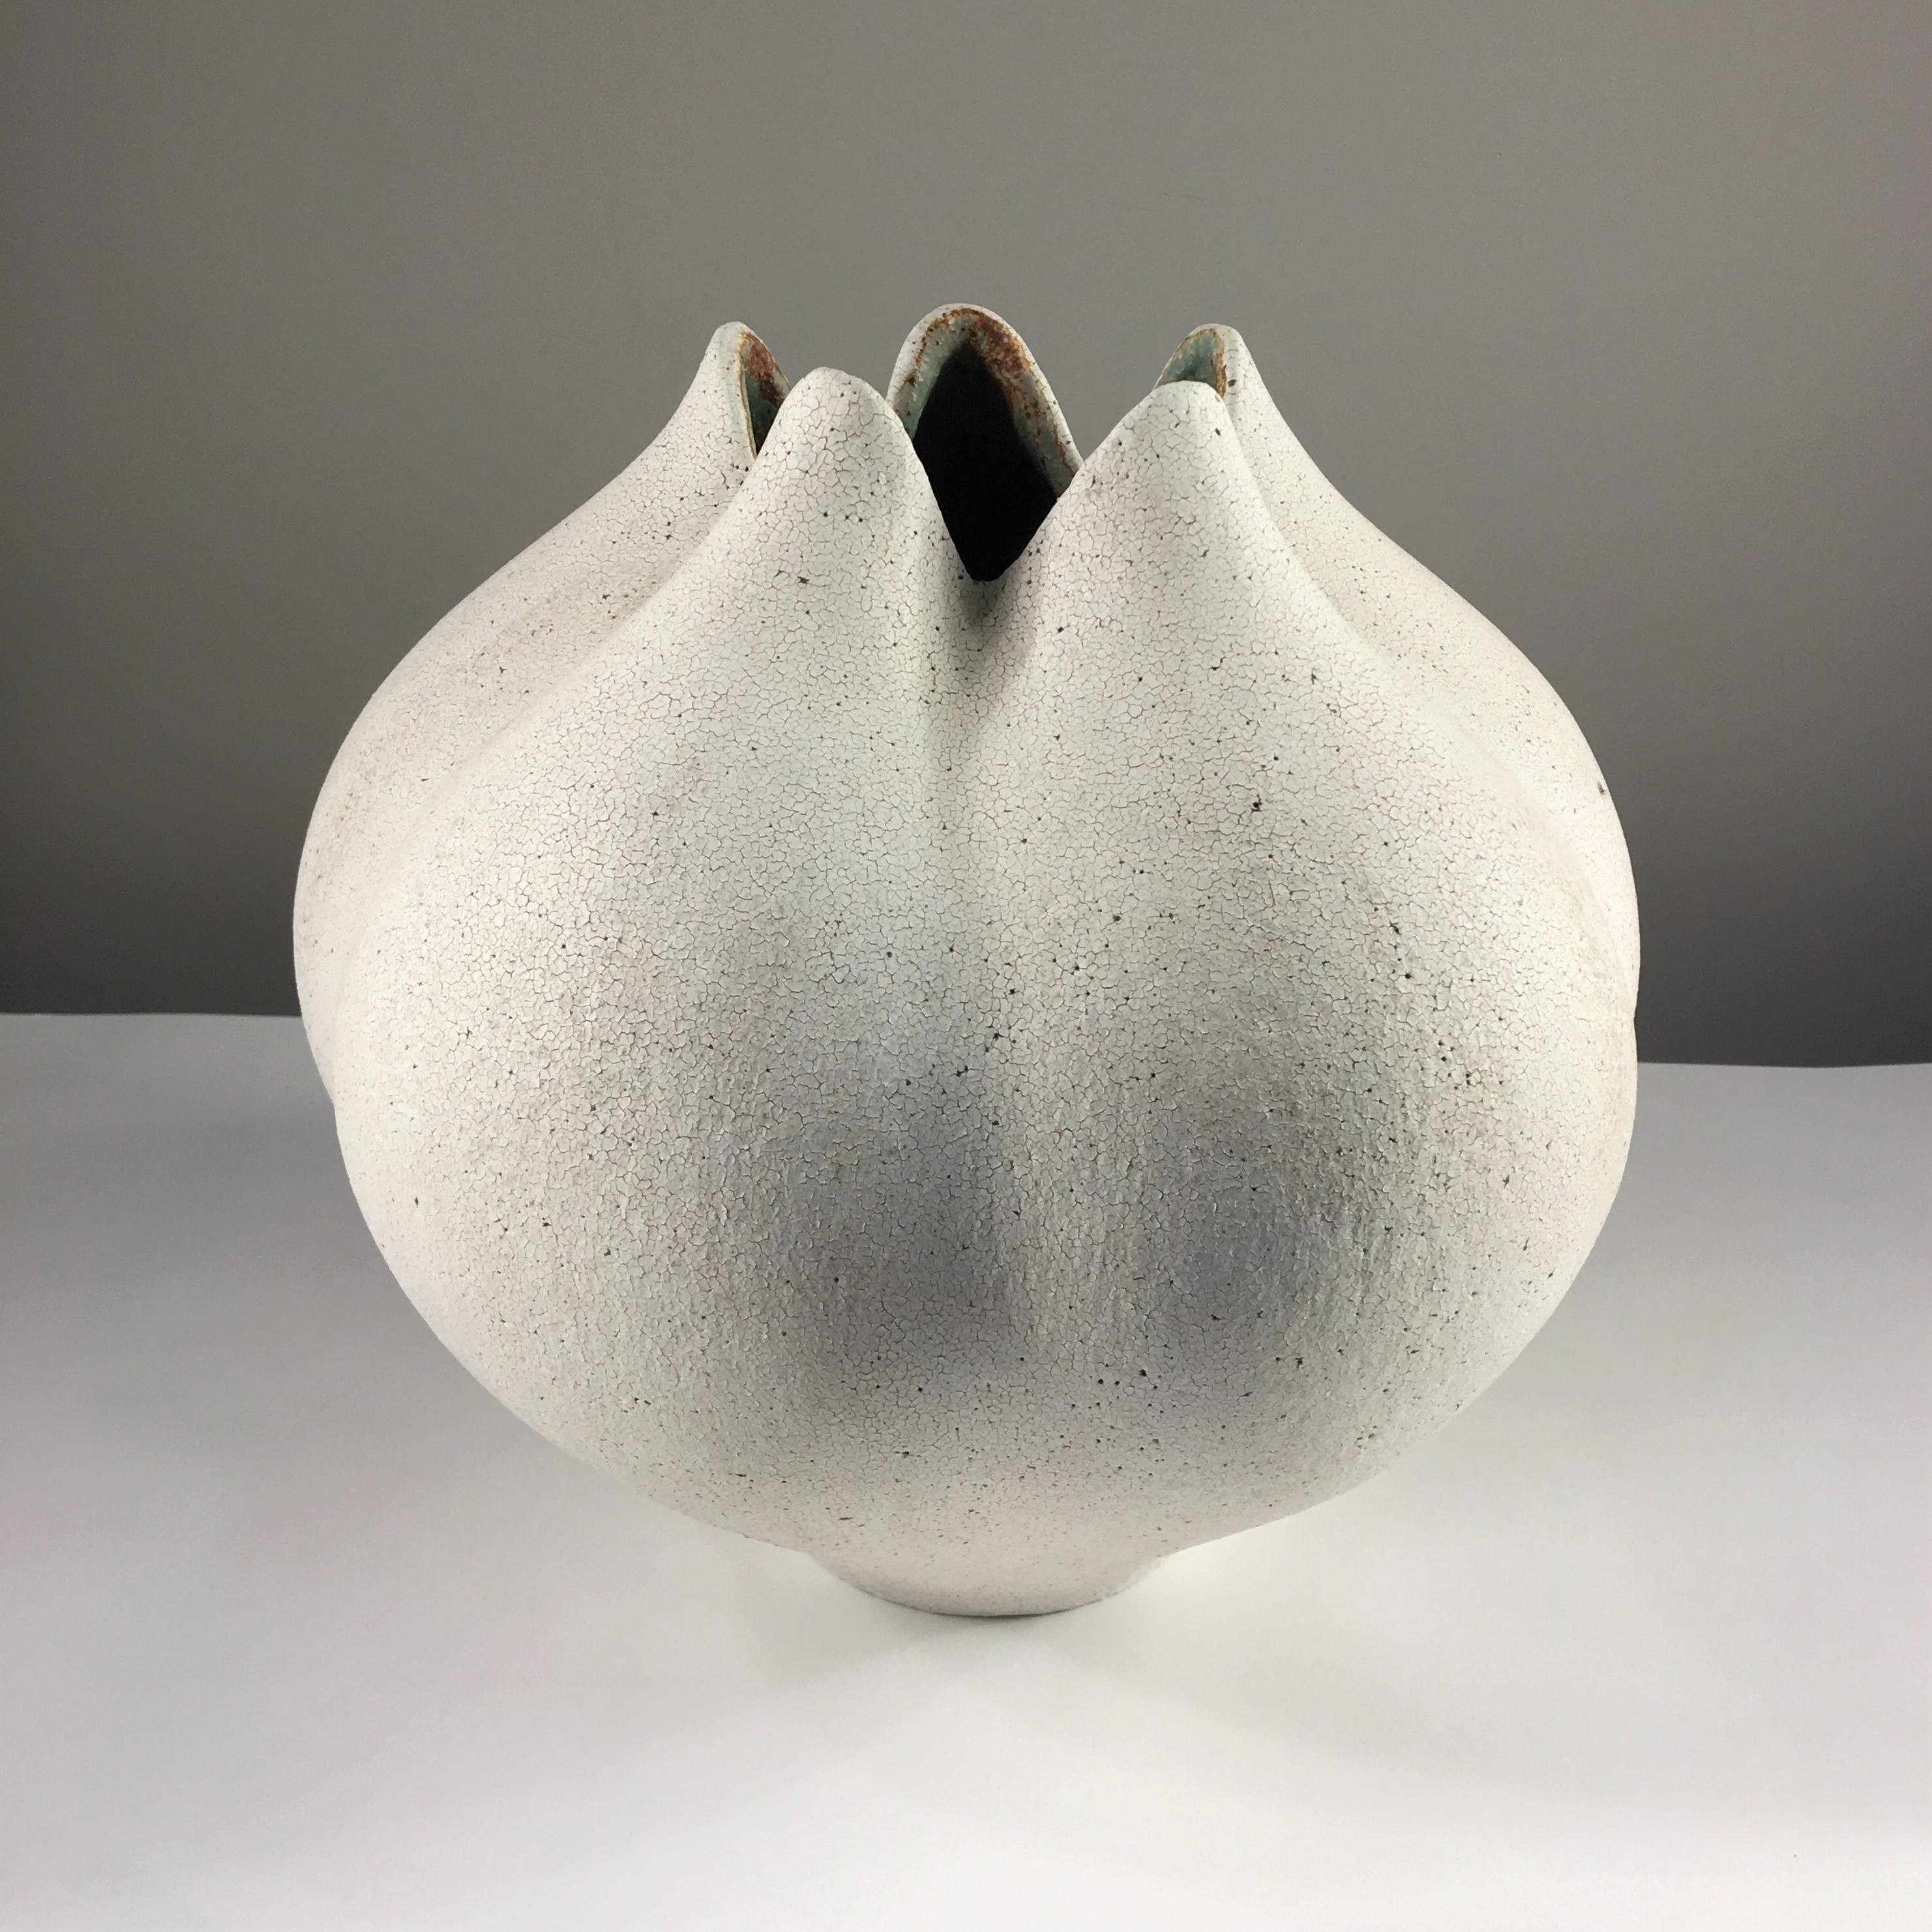 Contemporary ceramic artist Yumiko Kuga's glazed stoneware blossom vase no. 143 is part of her Crackle Series. All of the pieces in this series are hand-built and 100% handmade so they are one-of-a-kind and thus vary slightly from one another. All